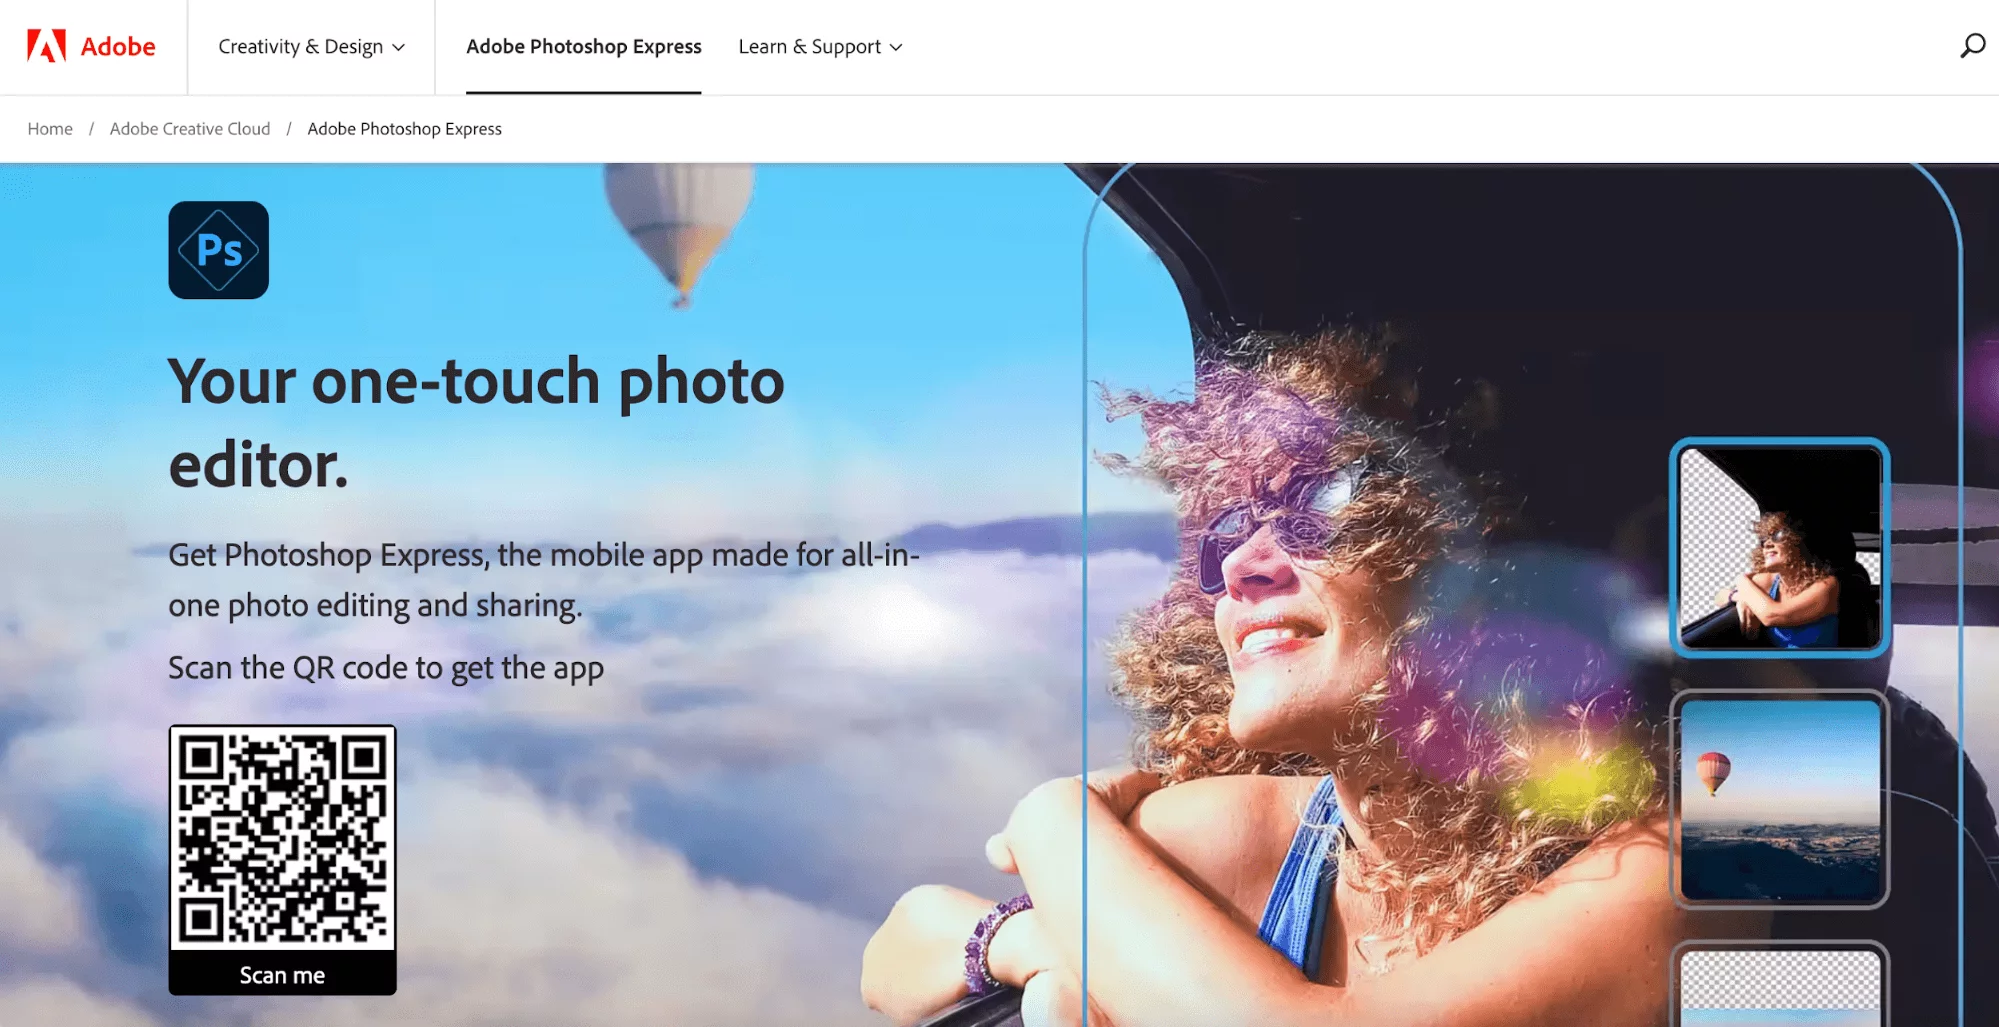 Adobe Photoshop Express homepage showing the image of a smiling girl being edited on multiple layers.